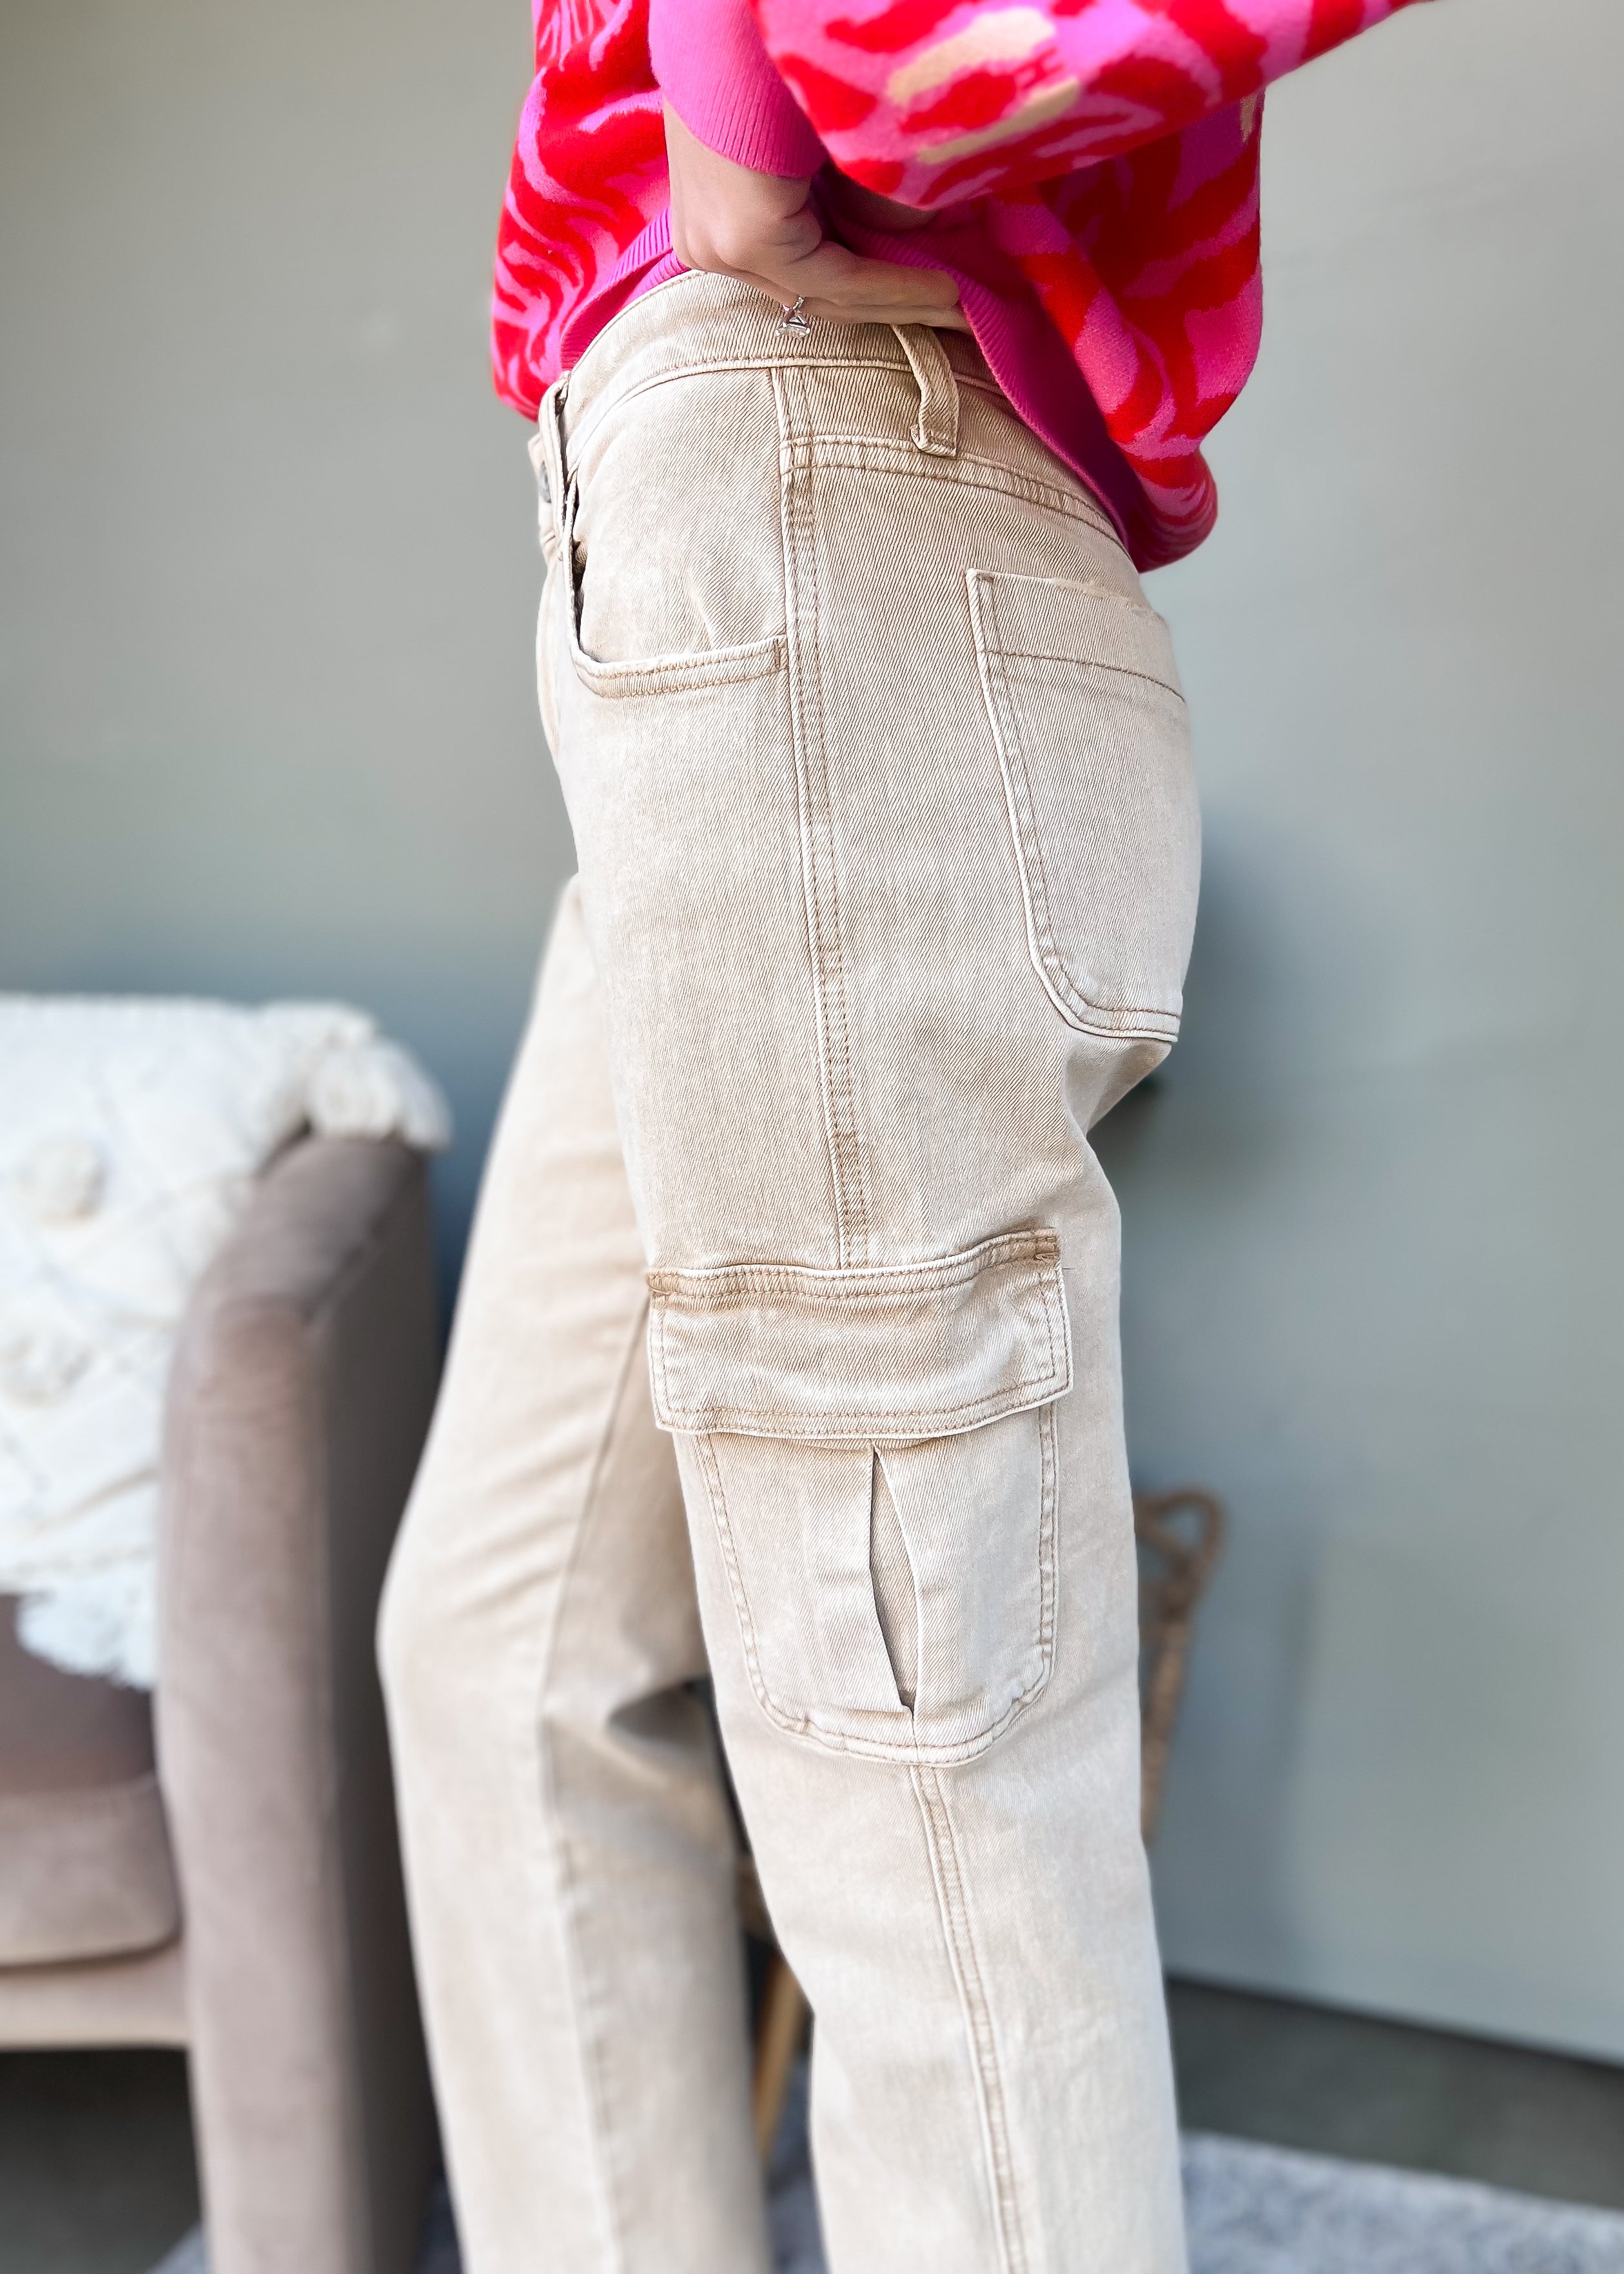 BDG Color Corduroy High-Waisted Relaxed Mom Pant